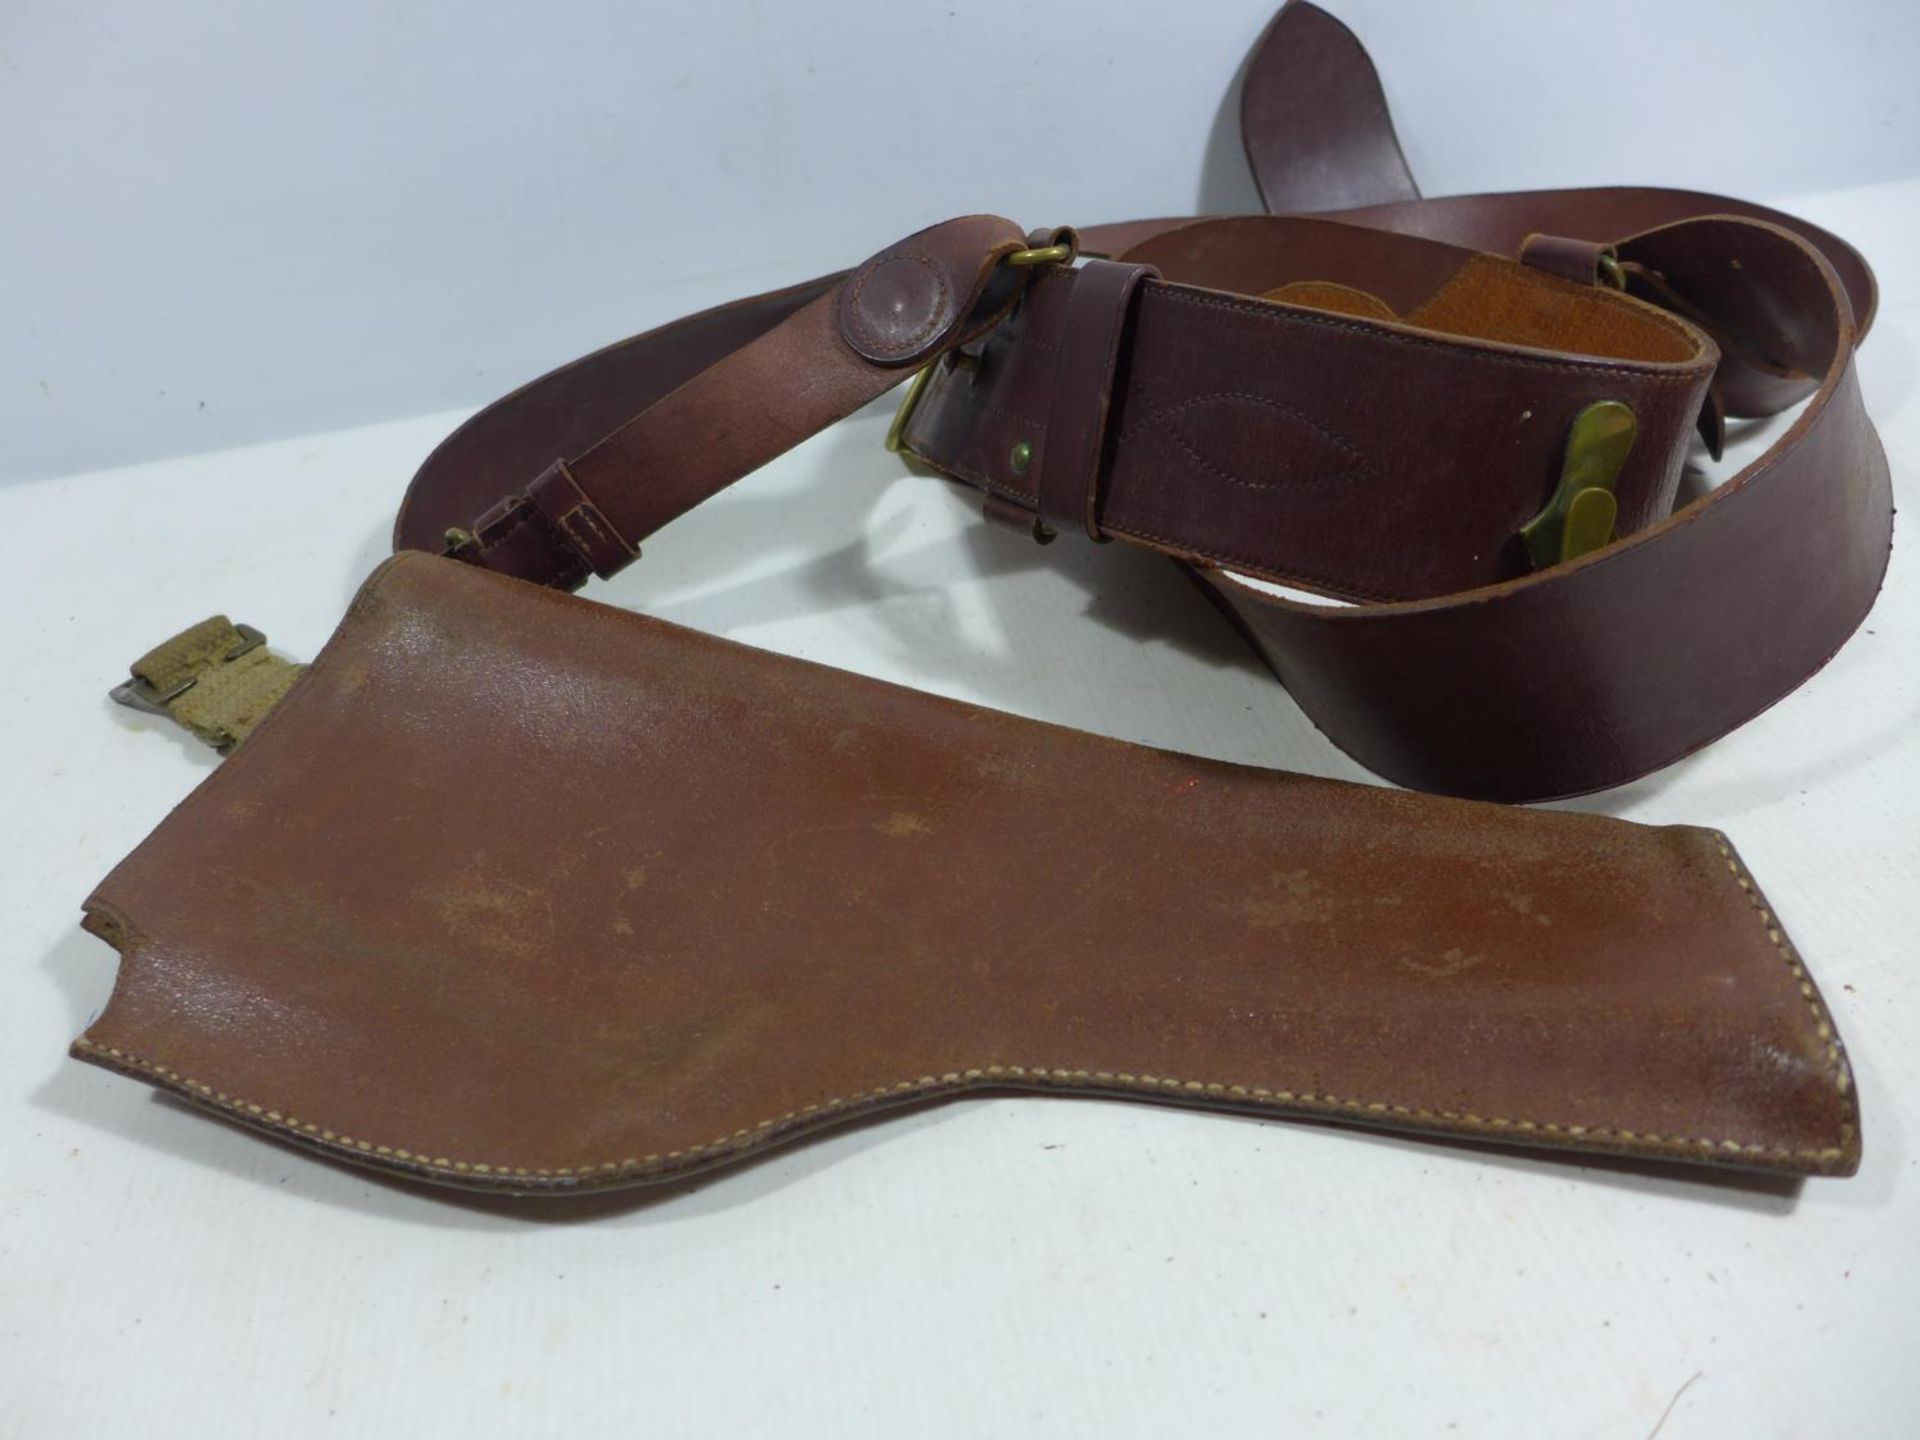 A MILITARY BROWN LEATHER GUN HOLSTER AND LEATHER SAM BROWNE BELT - Image 2 of 3